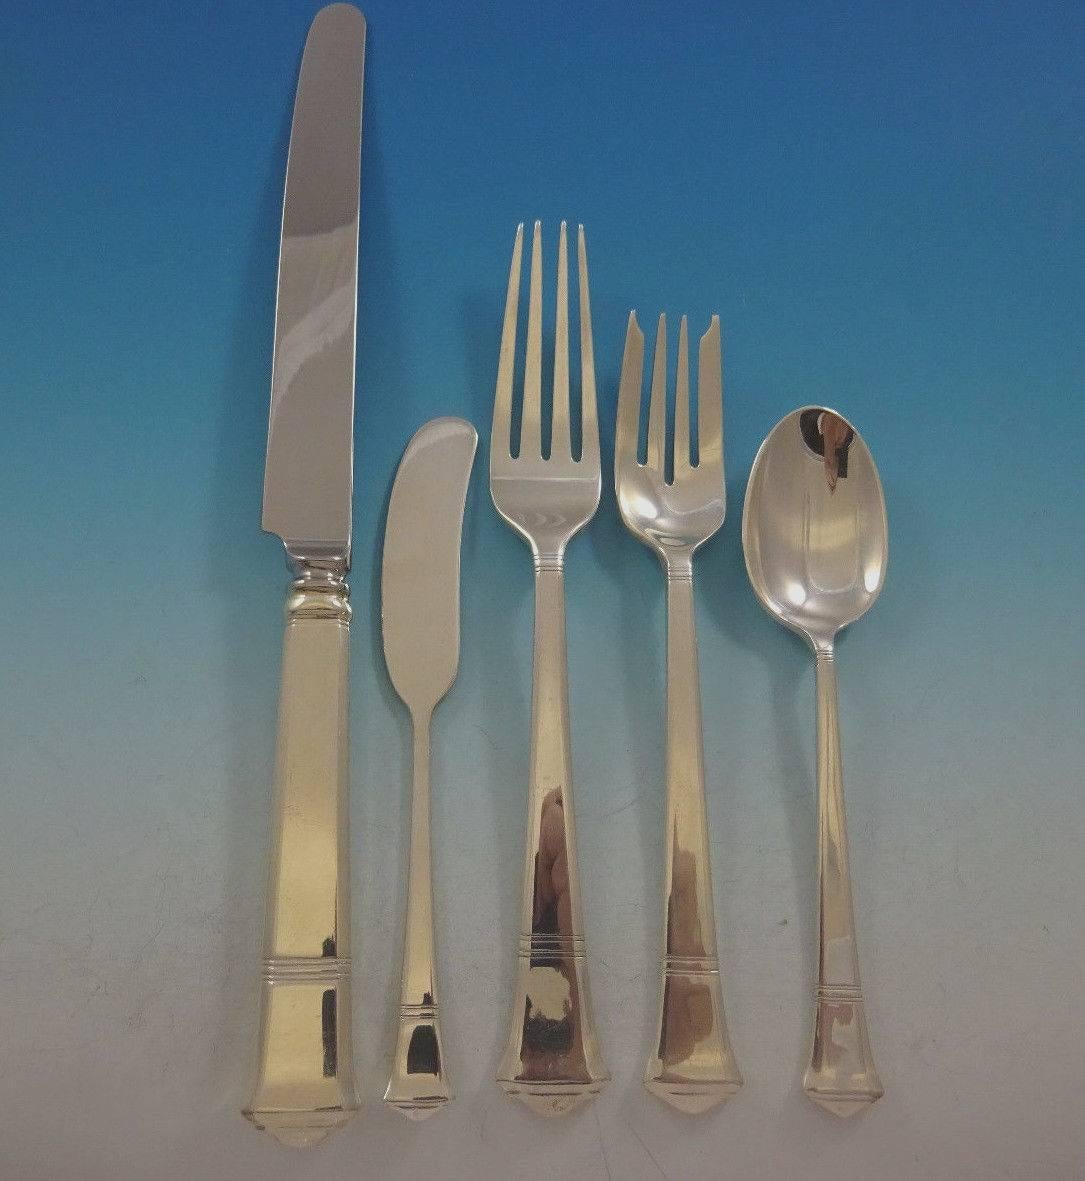 Windham by Tiffany & Co. Sterling Silver Flatware Set Dinner Service 30 Pieces 2